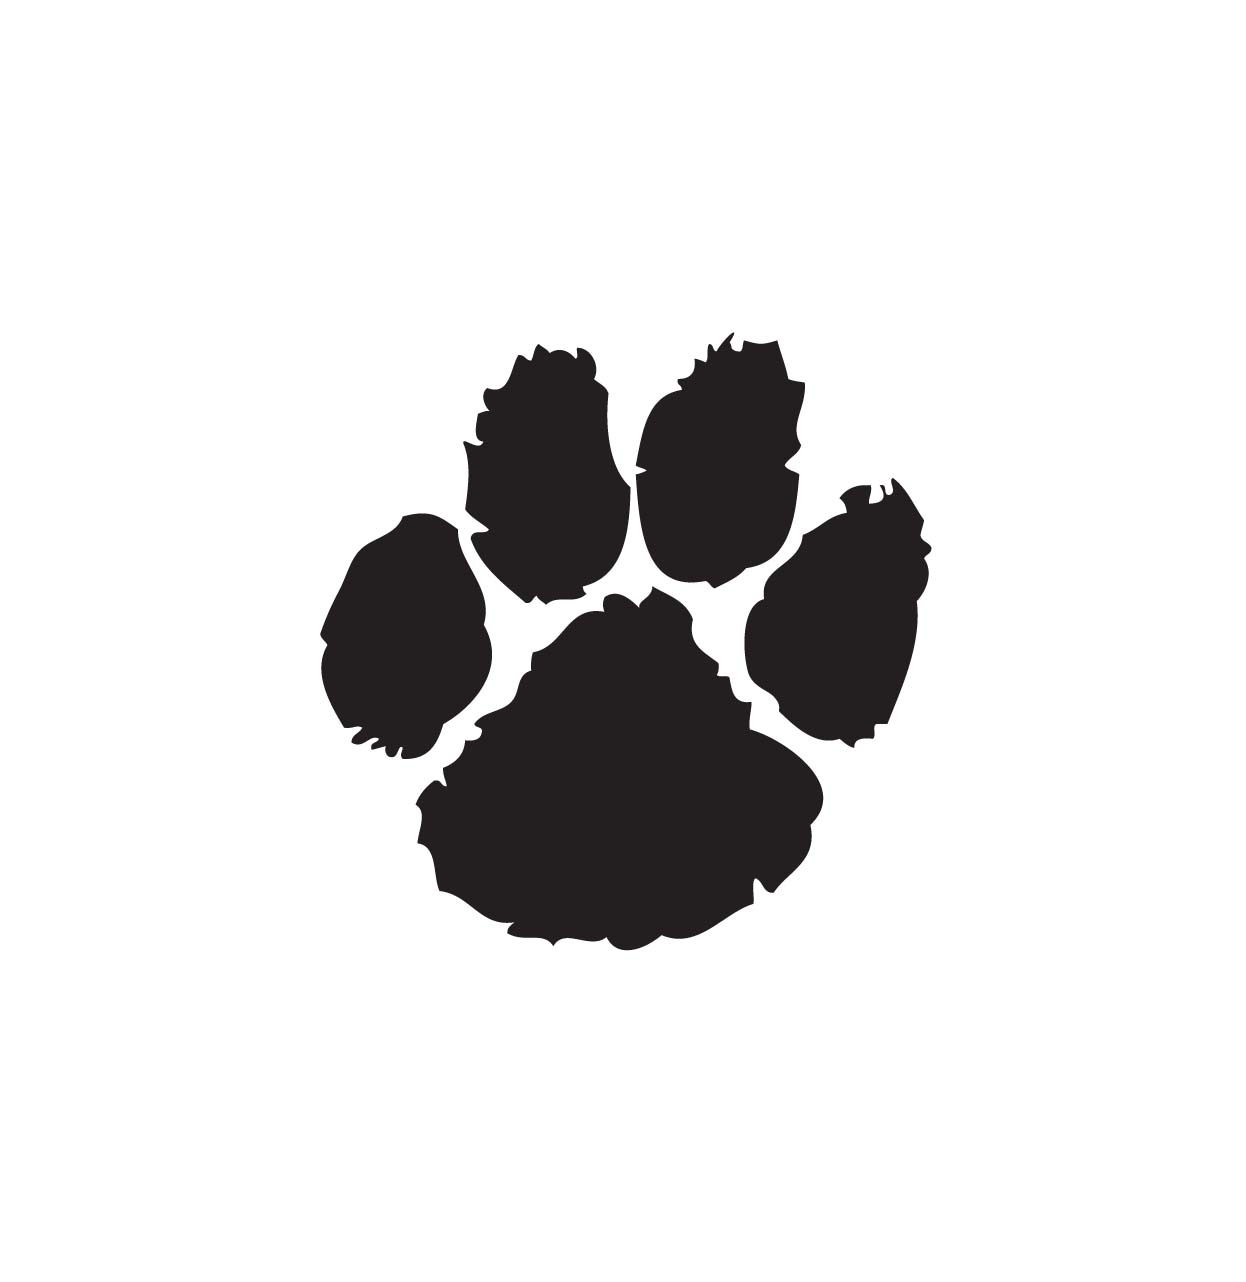 Clipart of dog paw print camo